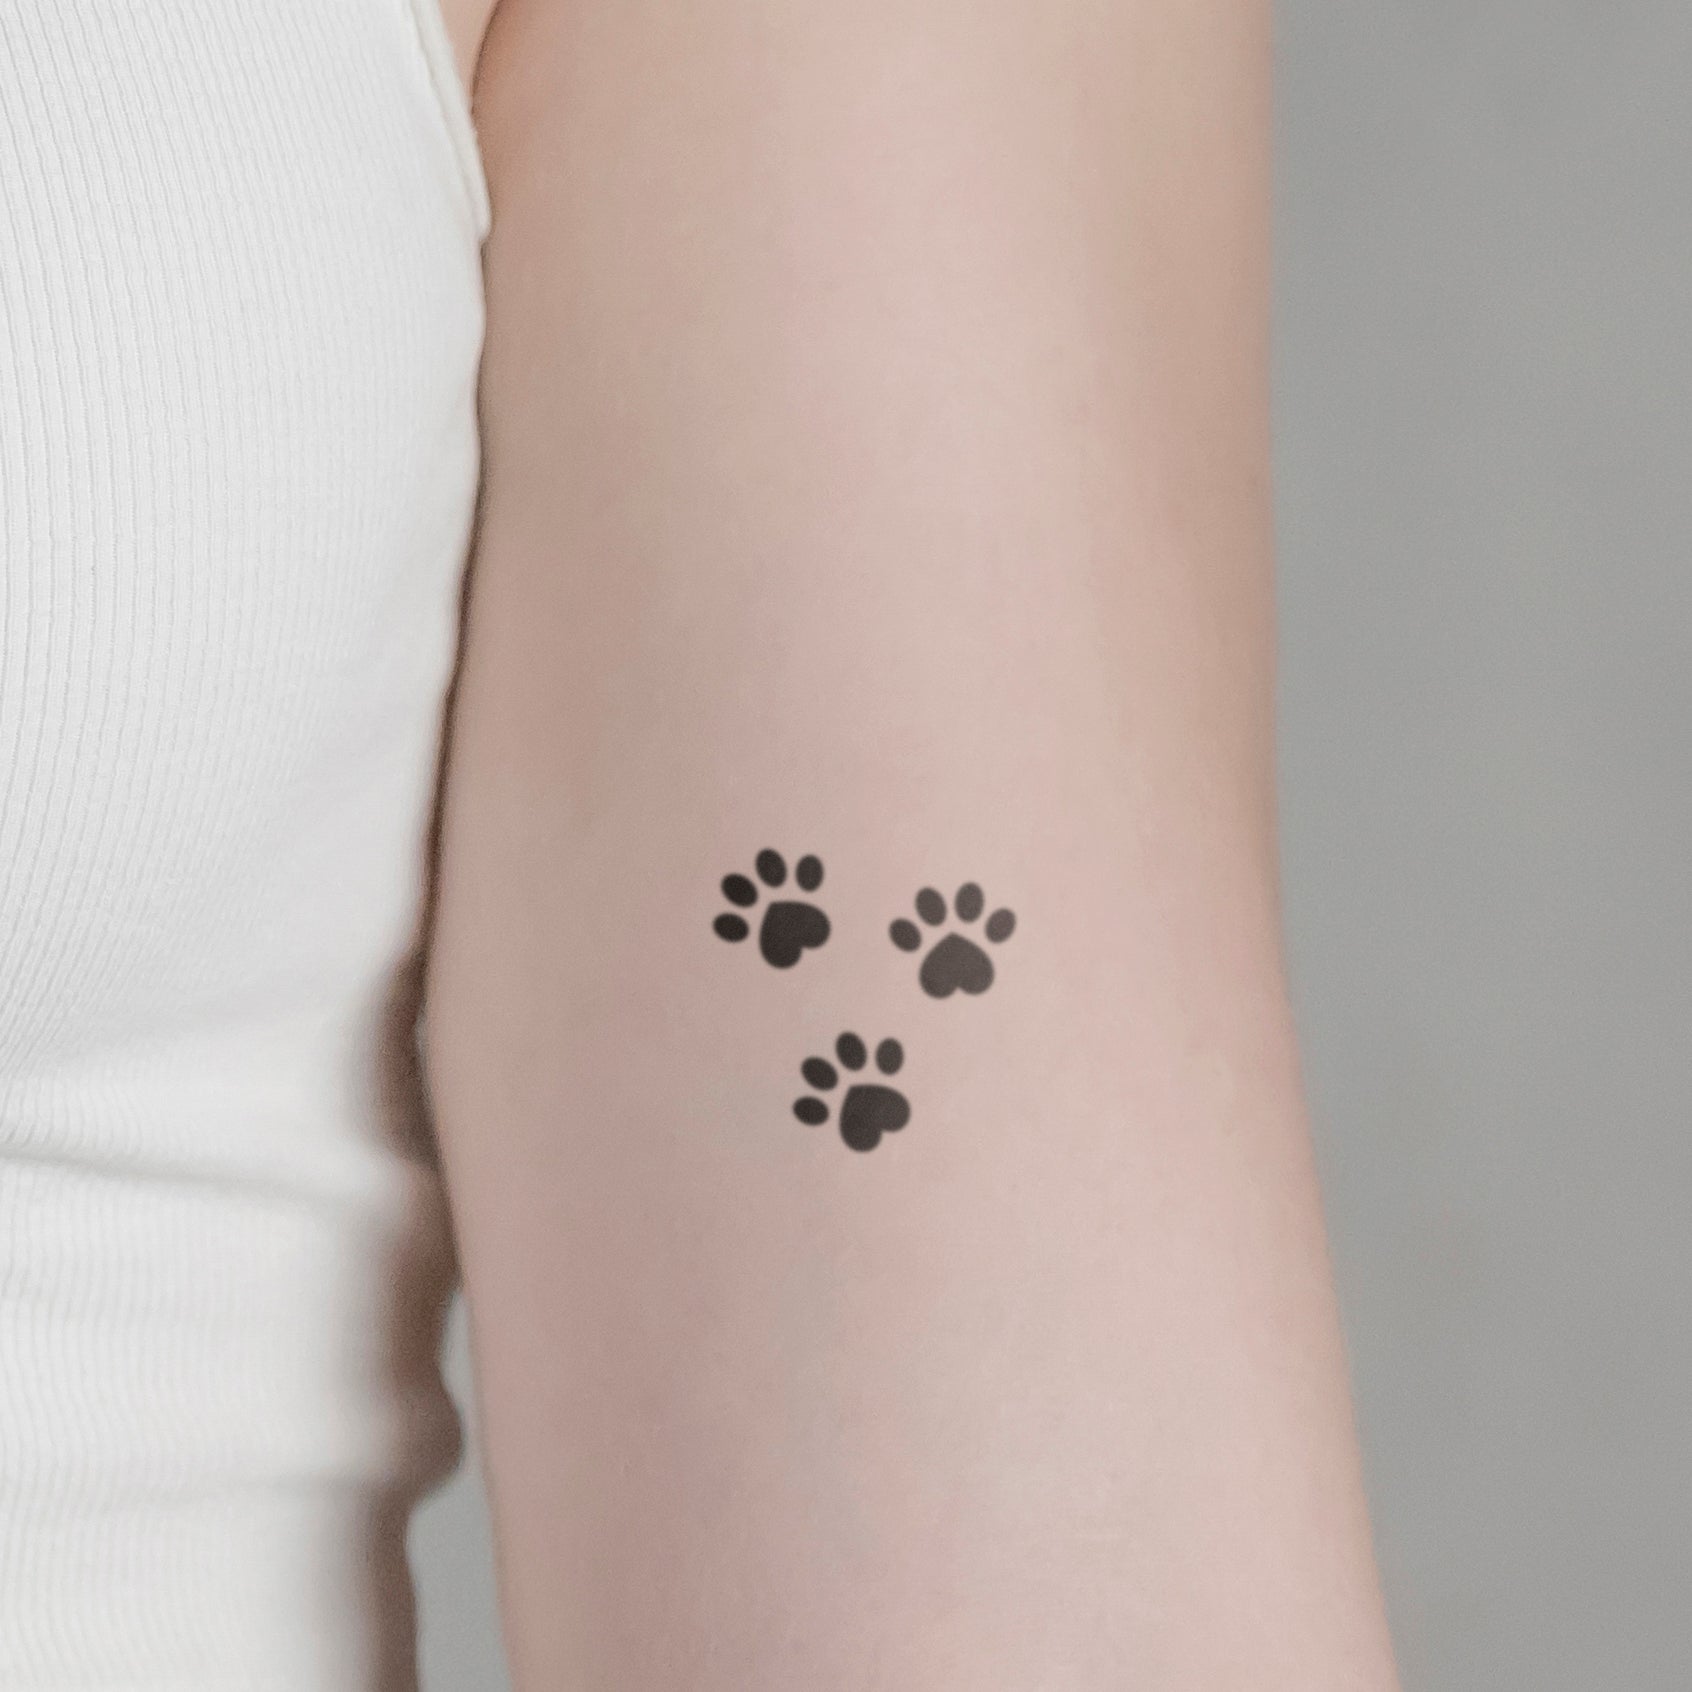 Doggy tattoo 🫶 | Gallery posted by Eva | Lemon8